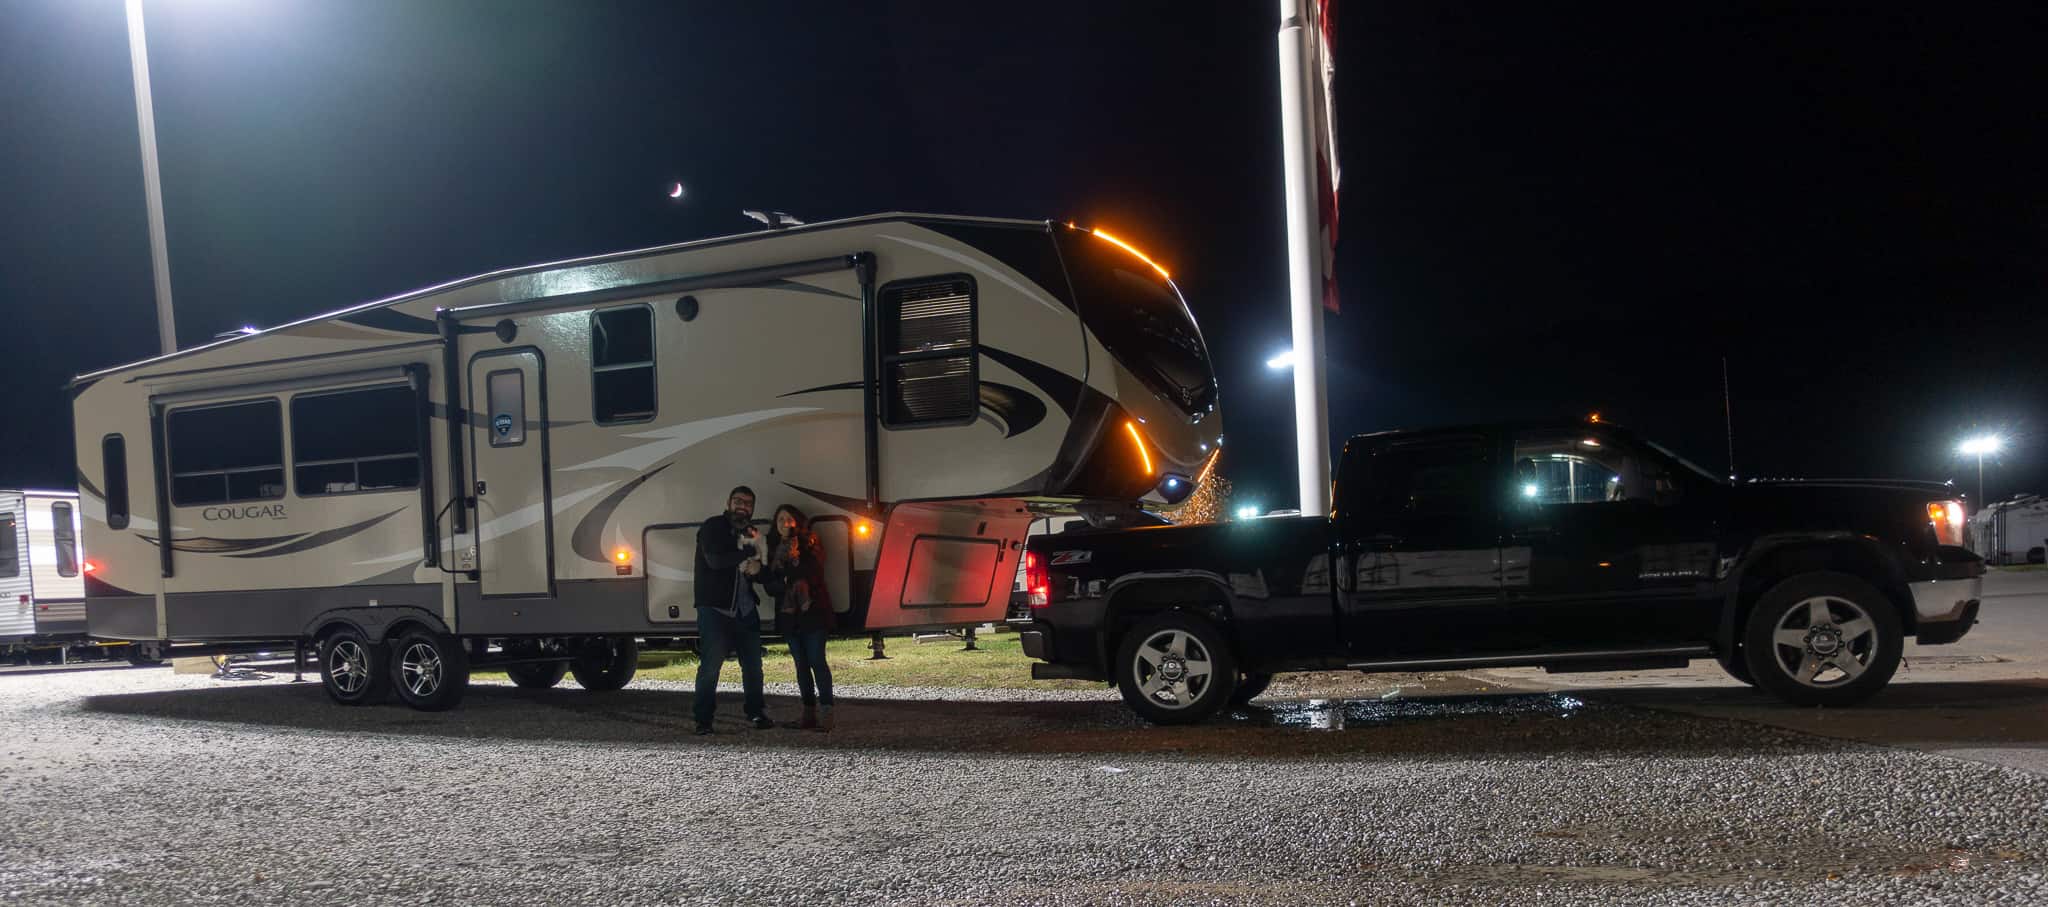 Us posing with our RV the night before taking off